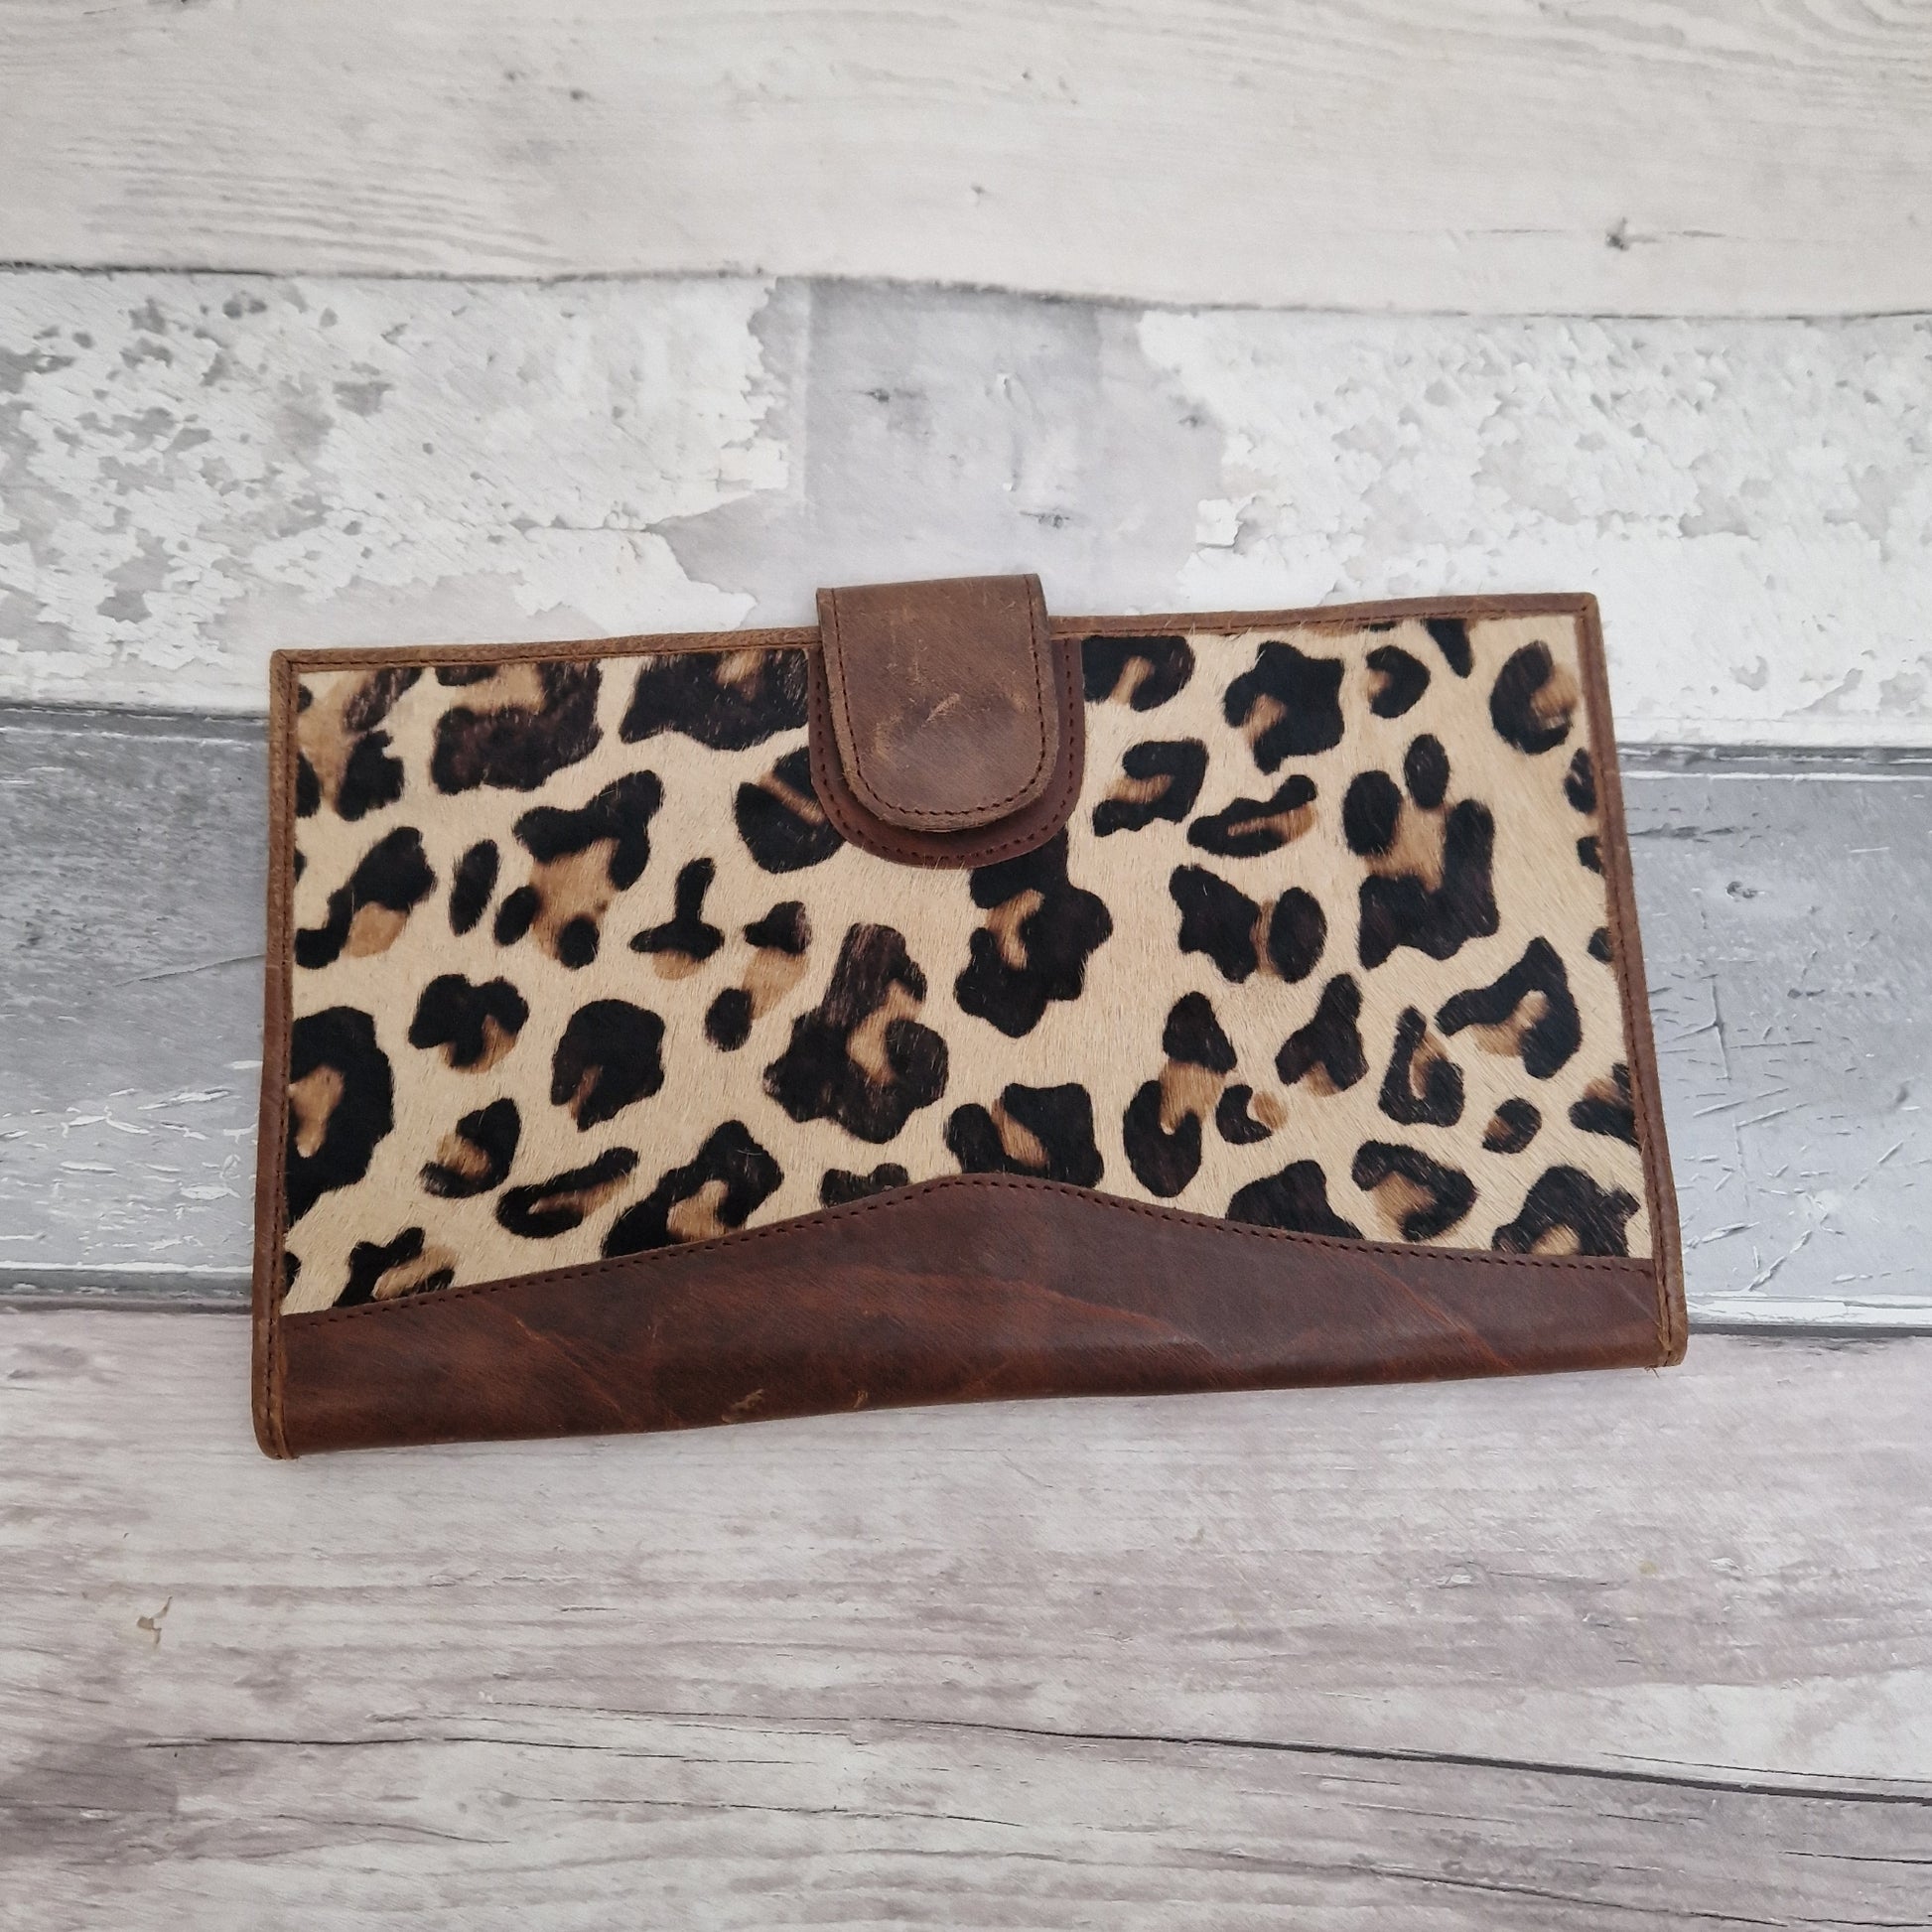 Textured Leopard print leather personal organiser